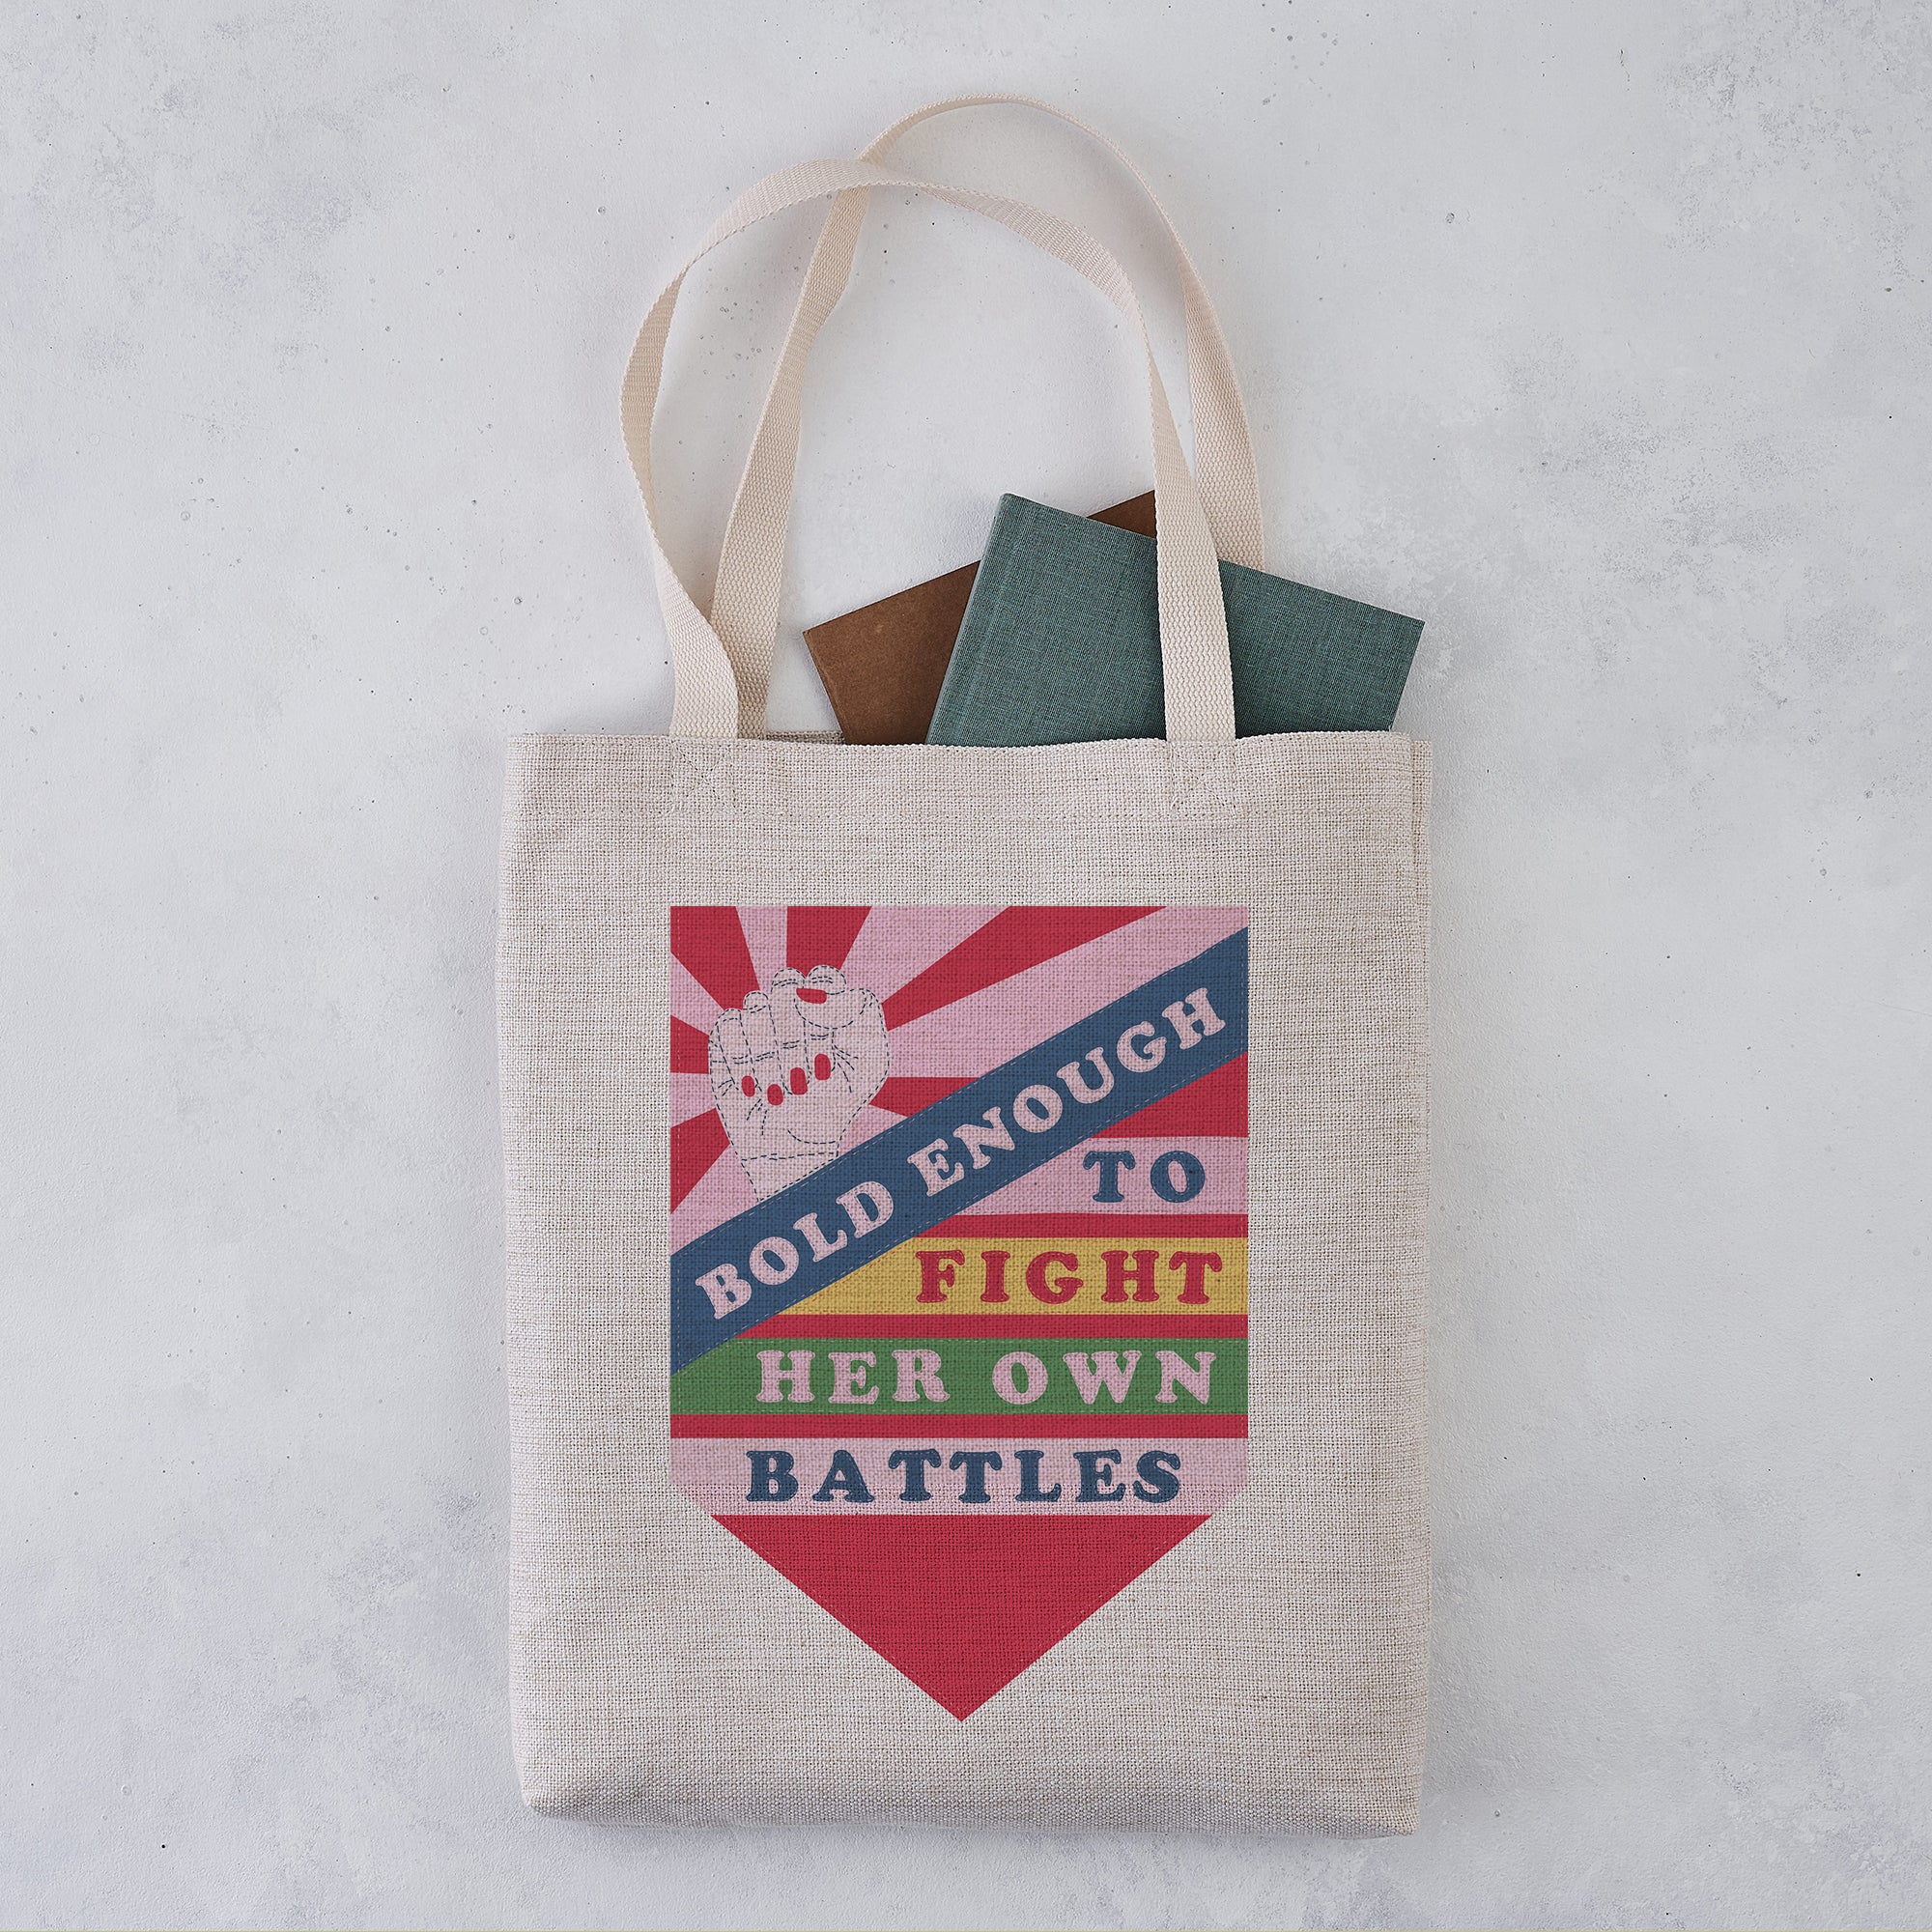 Empowering 'Bold Enough' Tote Bag - Pack of Four